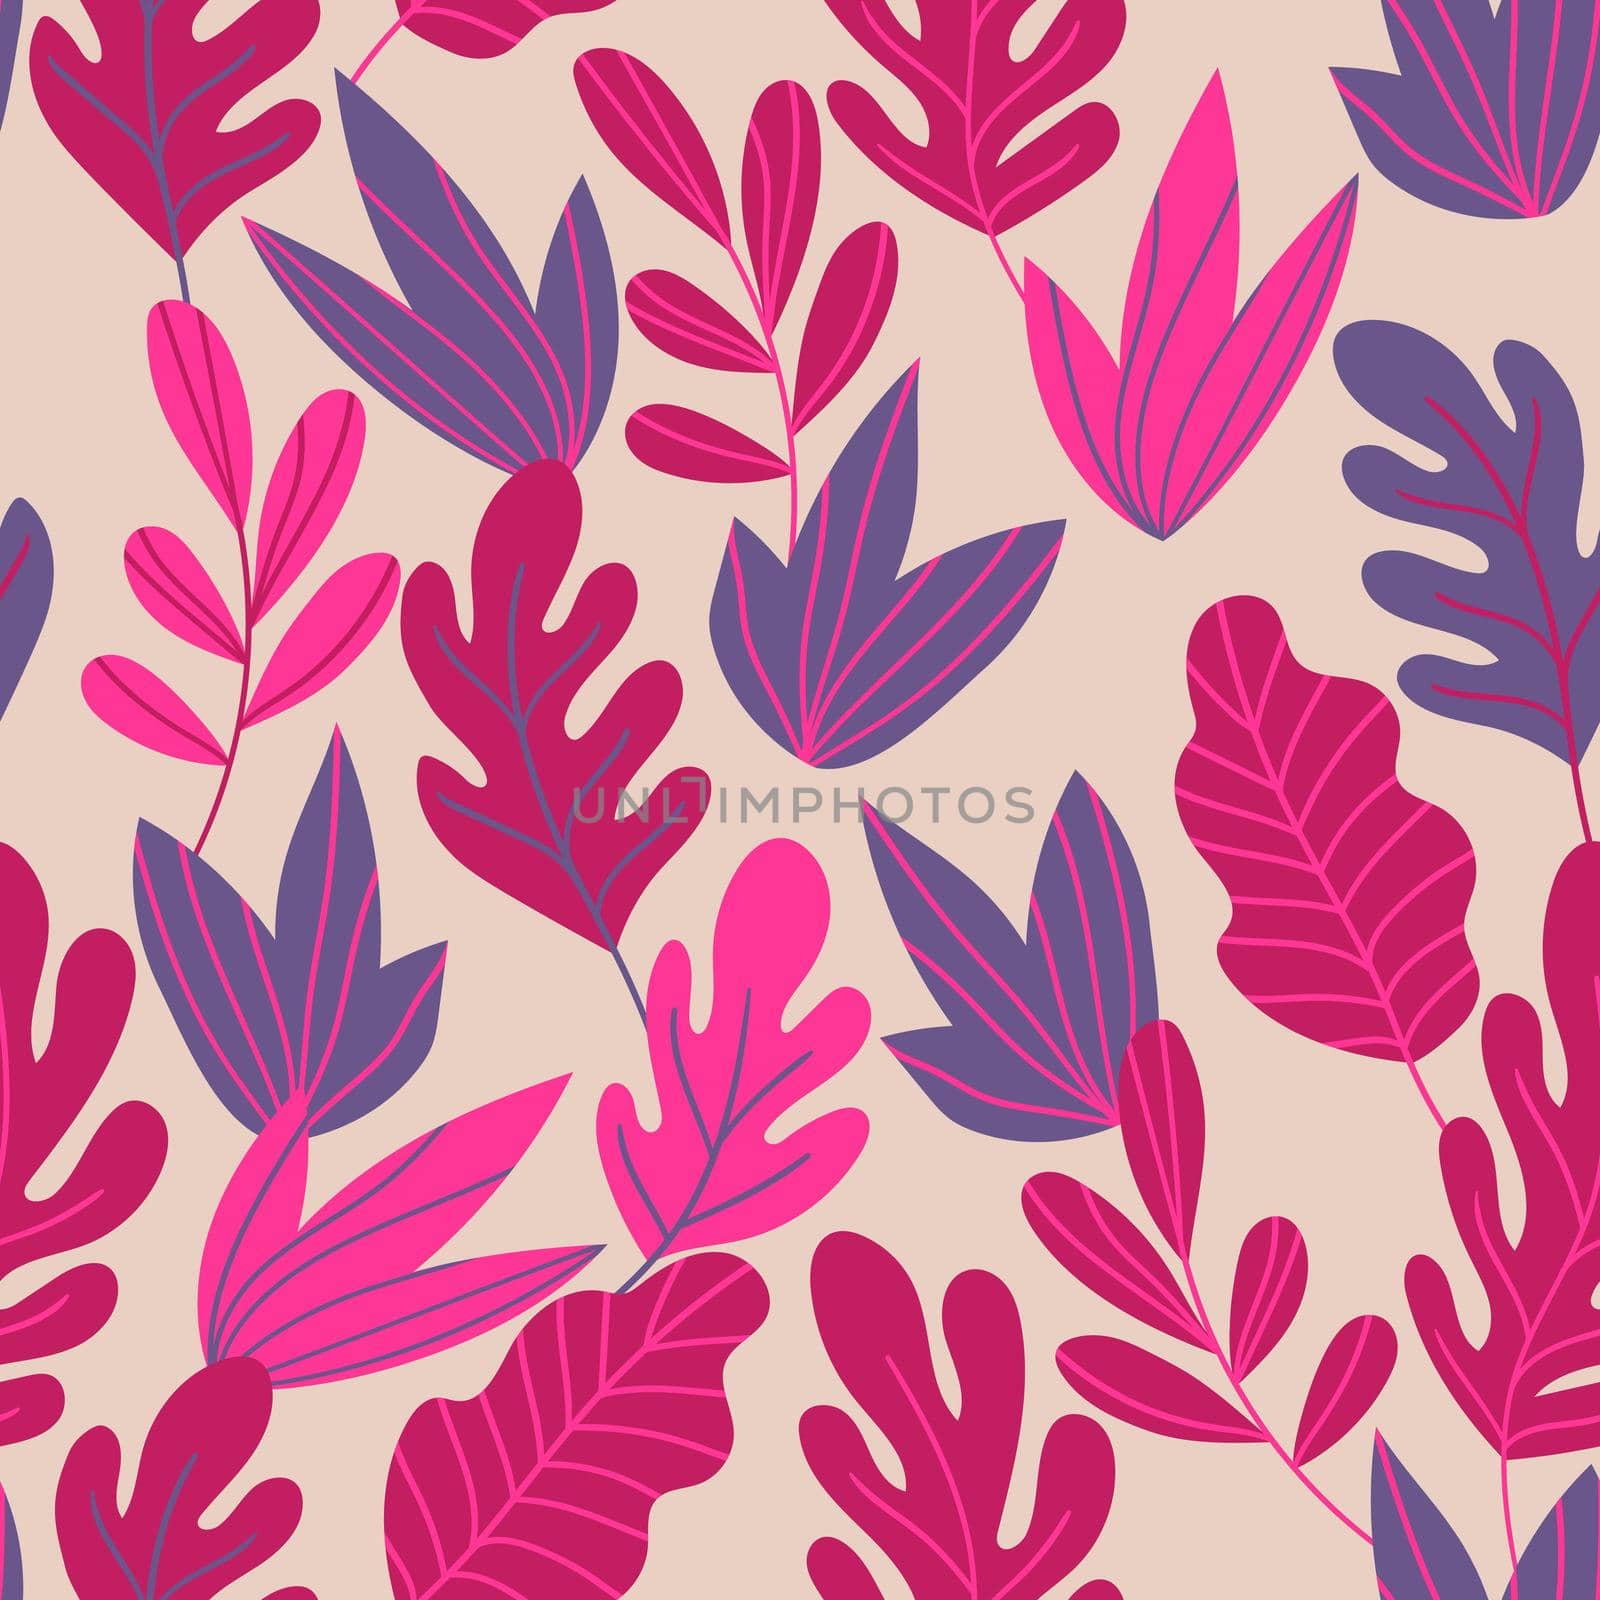 Floral seamless pattern with colorful exotic leaves on light background. Tropic branches. Fashion vector stock illustration for wallpaper, posters, card, fabric, textile.